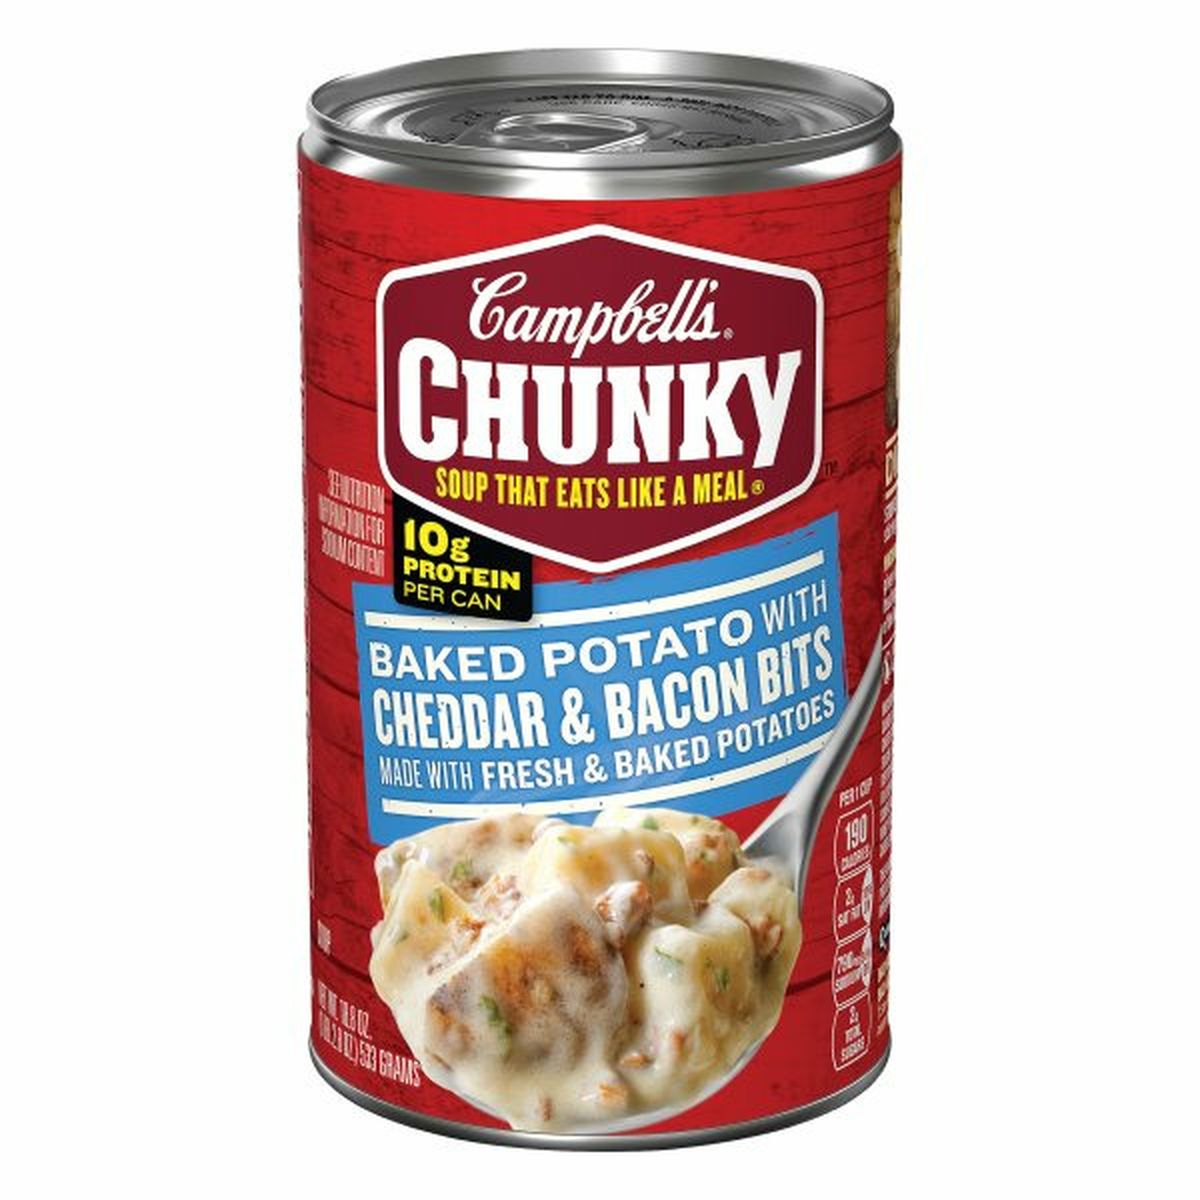 Calories in Campbell'ss Chunkys Soup, Baked Potato with Cheddar & Bacon Bits